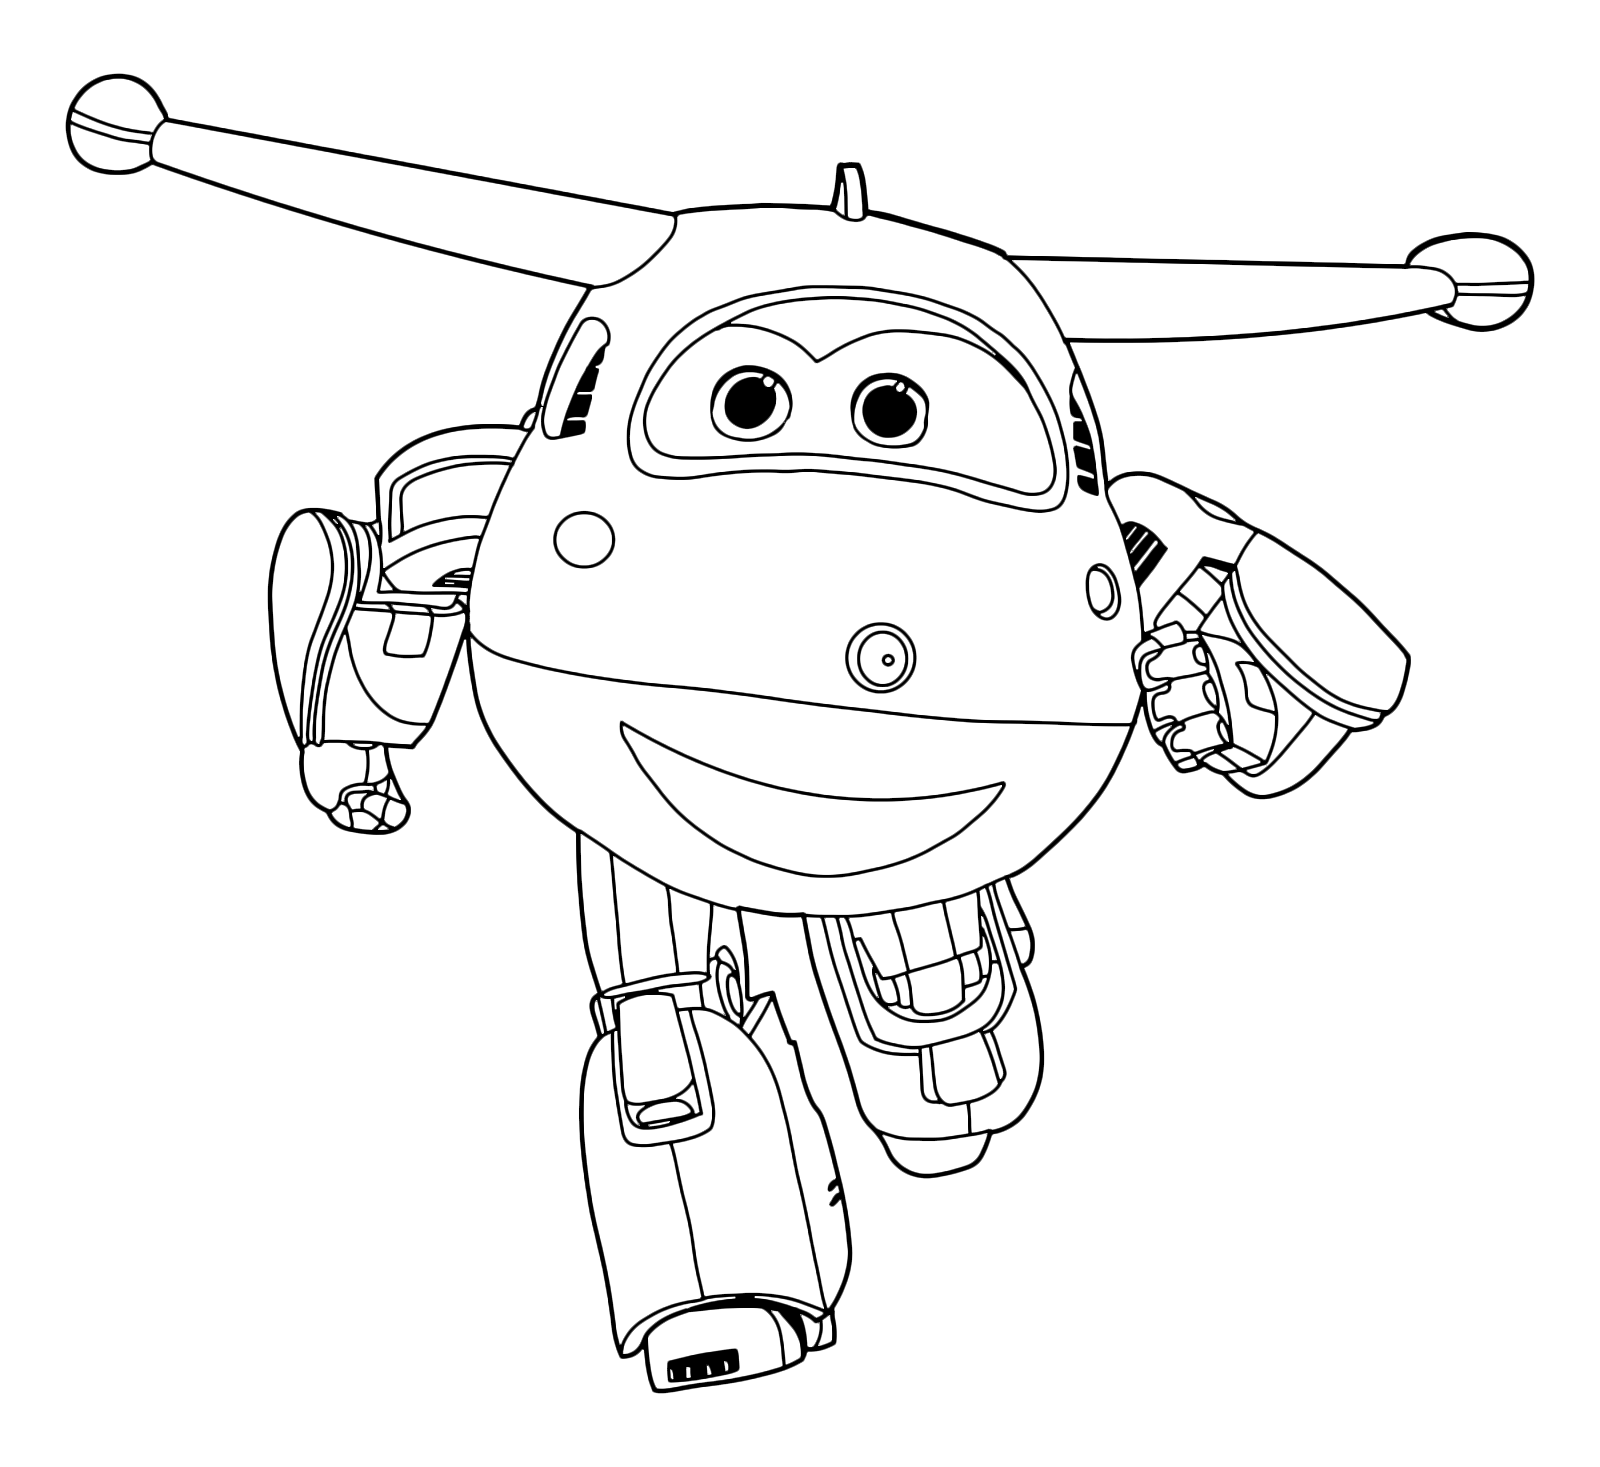 Printable and coloring pages of Super Wings. 